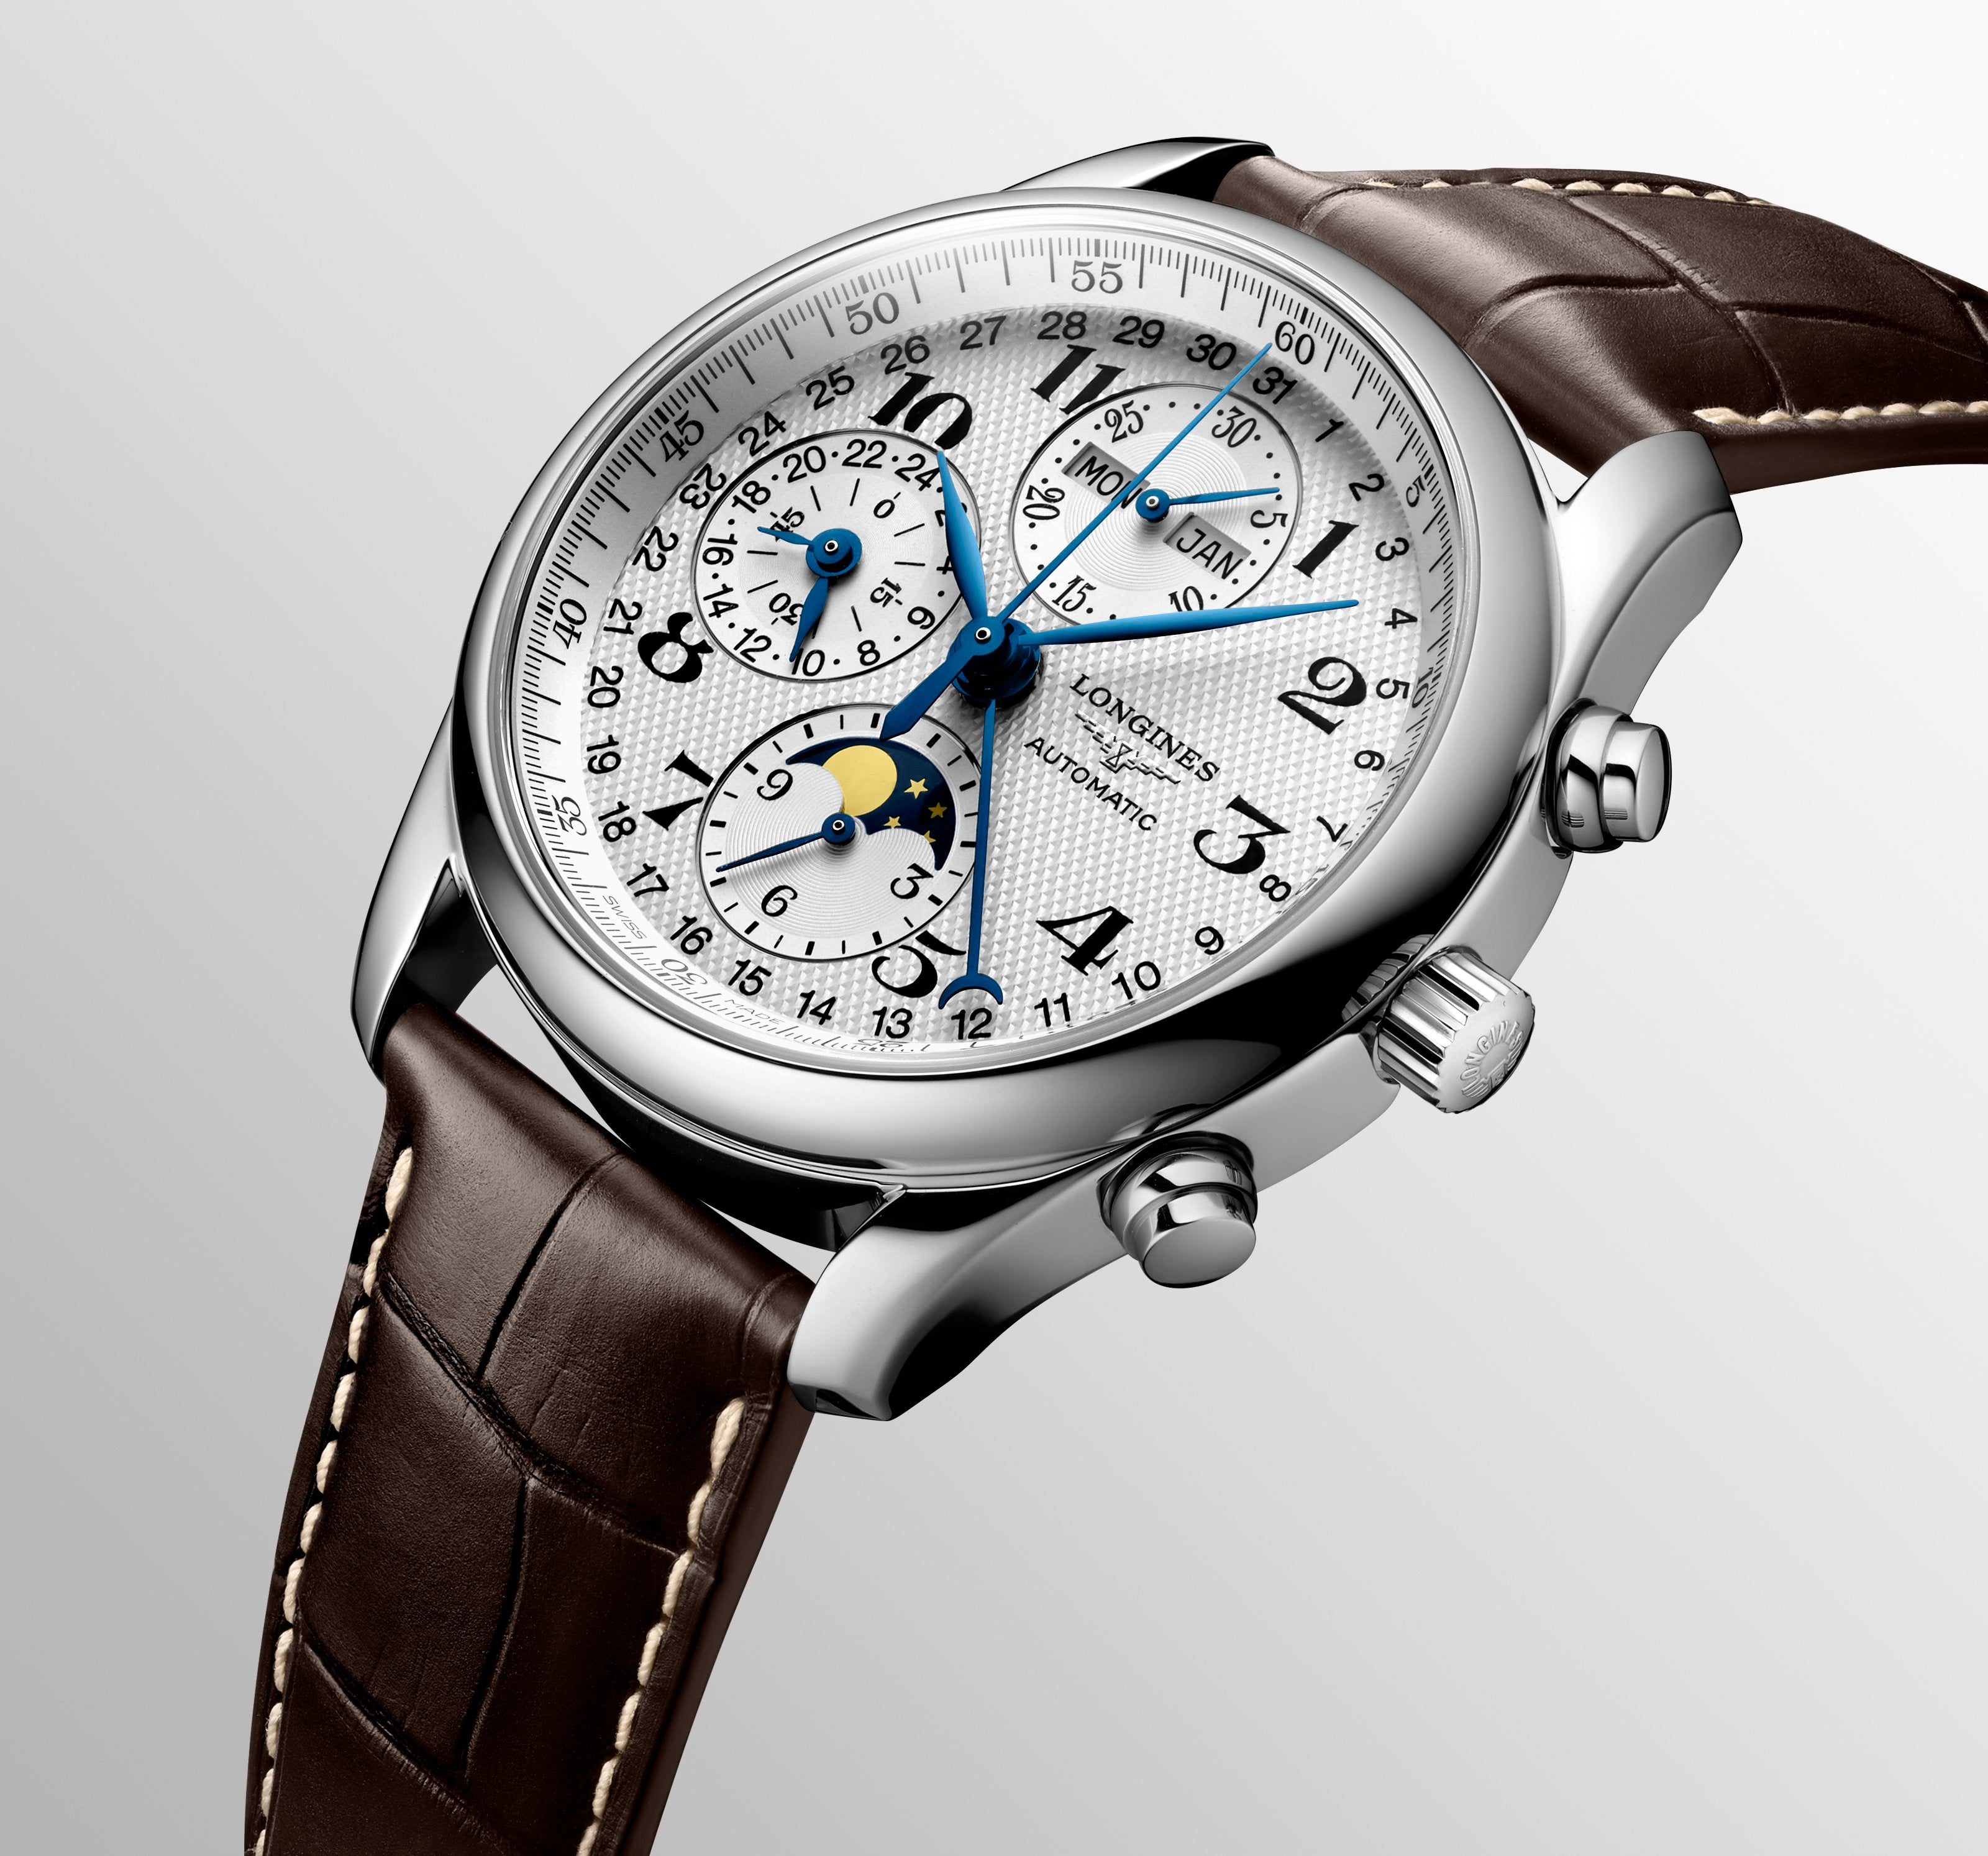 THE LONGINES MASTER COLLECTION Moonphase & Triple Calendar L2.673.4.78.3